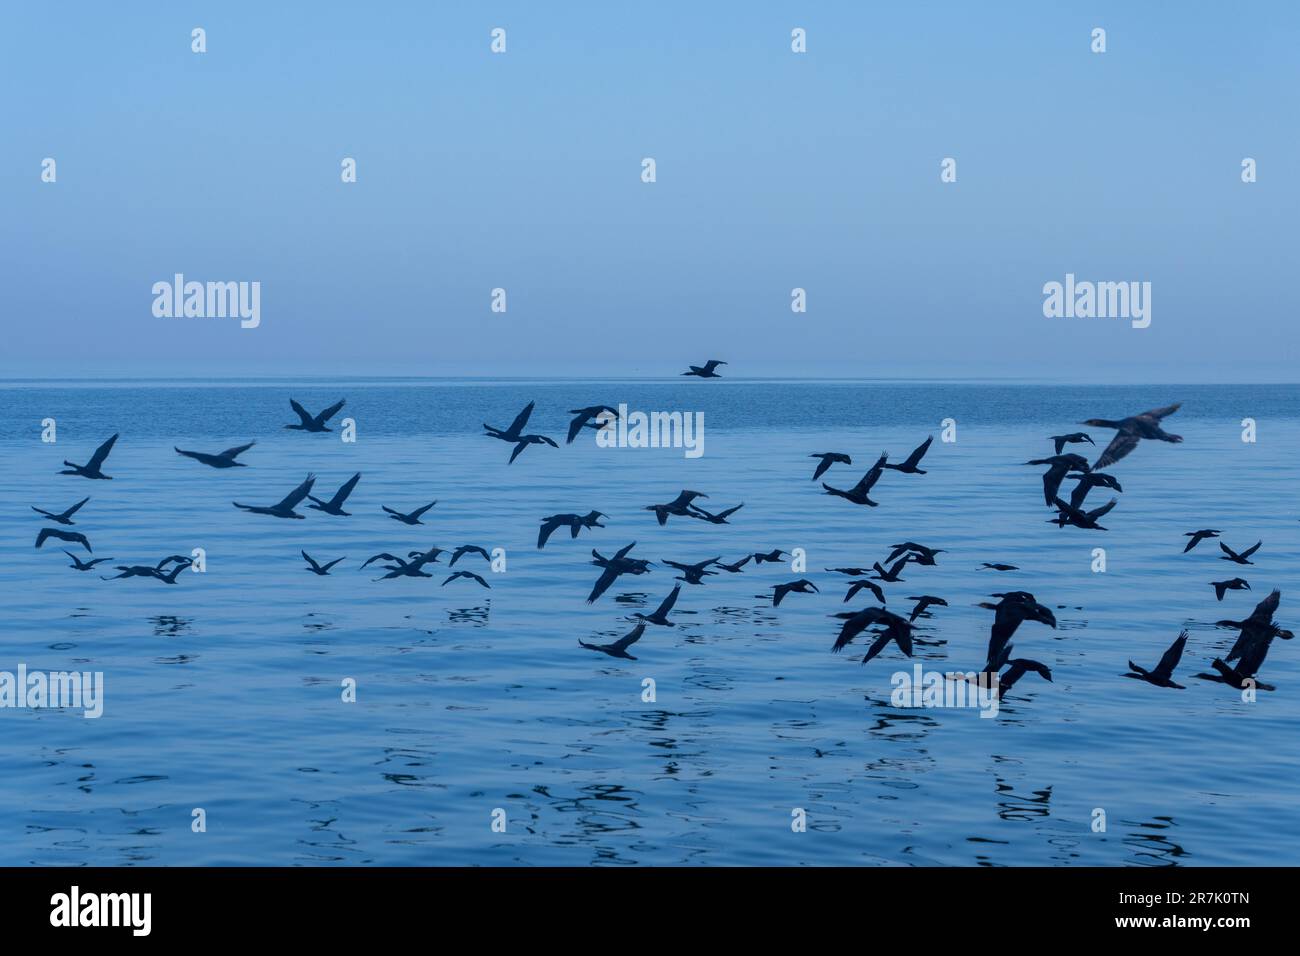 Flock of Cape cormorant or Cape shag (Phalacrocorax capensis) in Walvis Bay, Namibia in flight Stock Photo